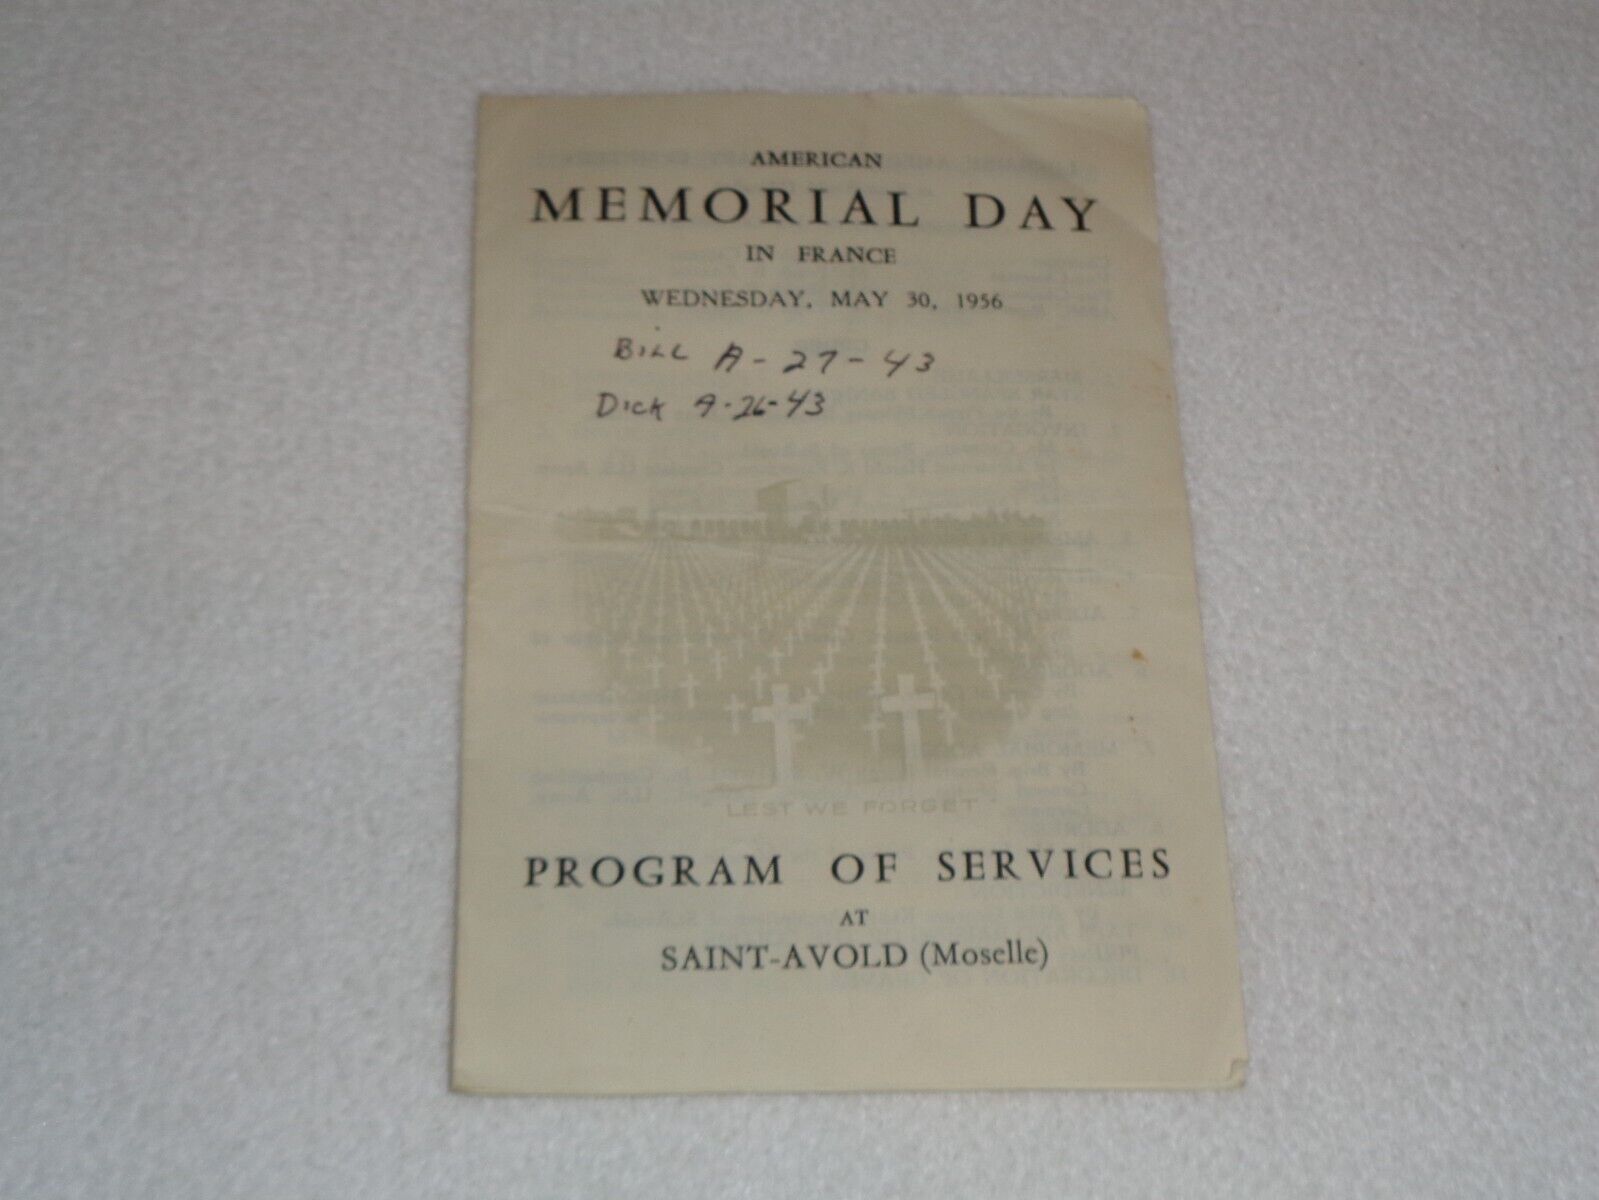 1956 American Memorial Day in France WW2 Saint-Avold Rare Program of Services